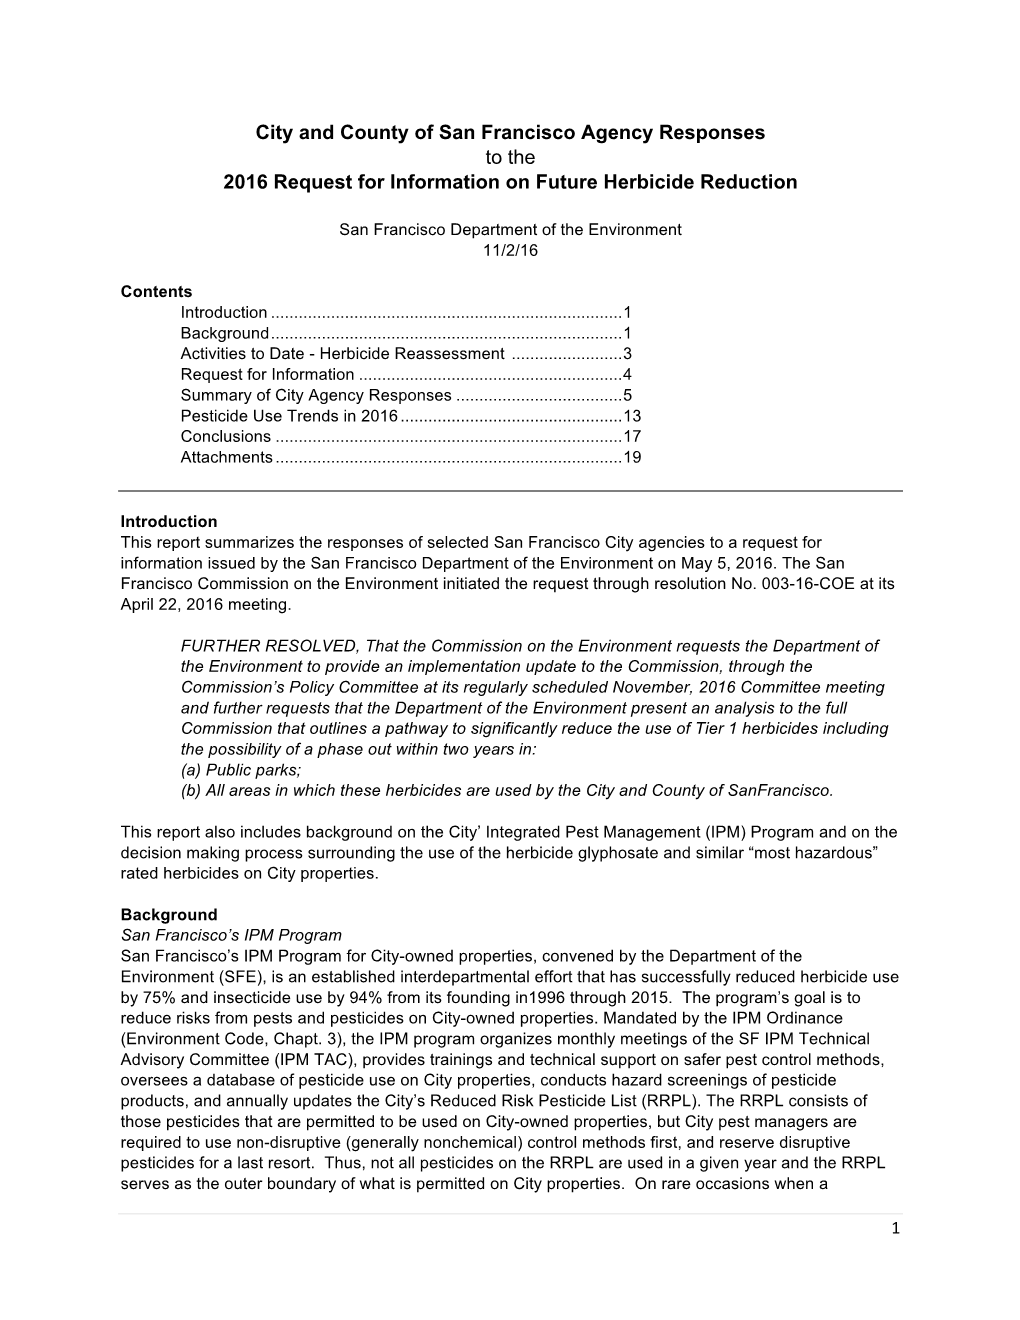 City and County of San Francisco Agency Responses to the 2016 Request for Information on Future Herbicide Reduction